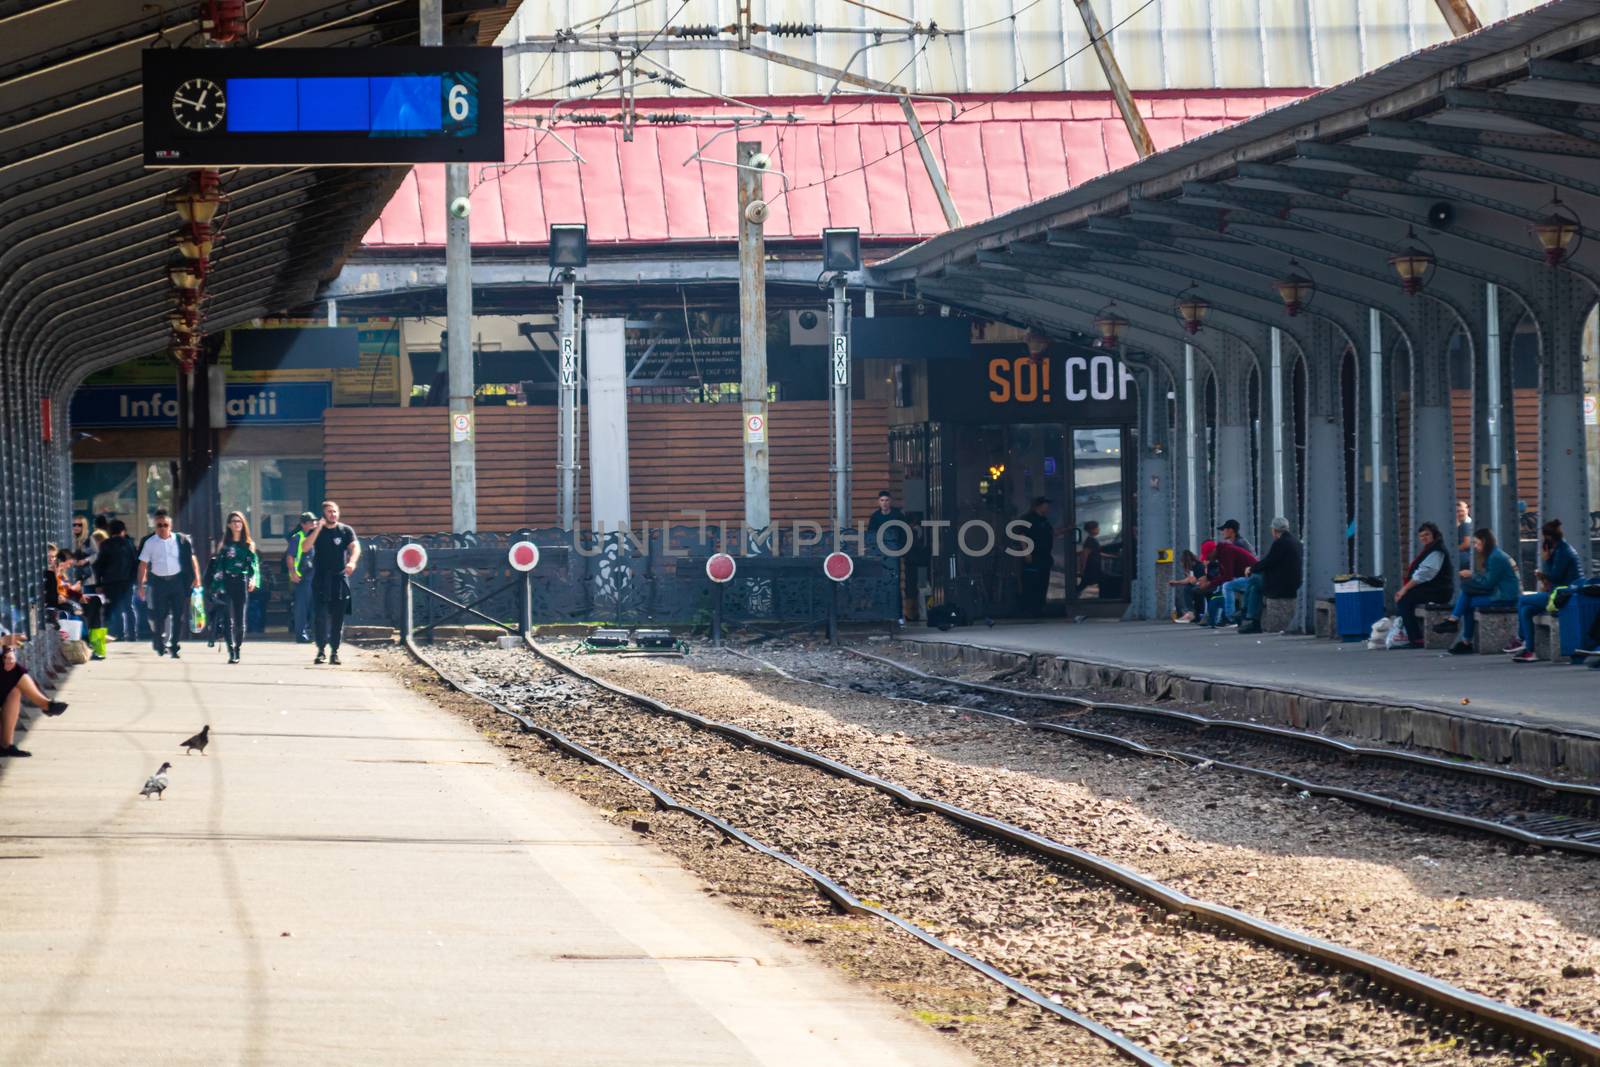 Changes and complications caused by coronavirus COVID-19 virus, world without crowds, empty train platform. No commuters, no travelers at the North Railway Station in Bucharest, Romania, 2020